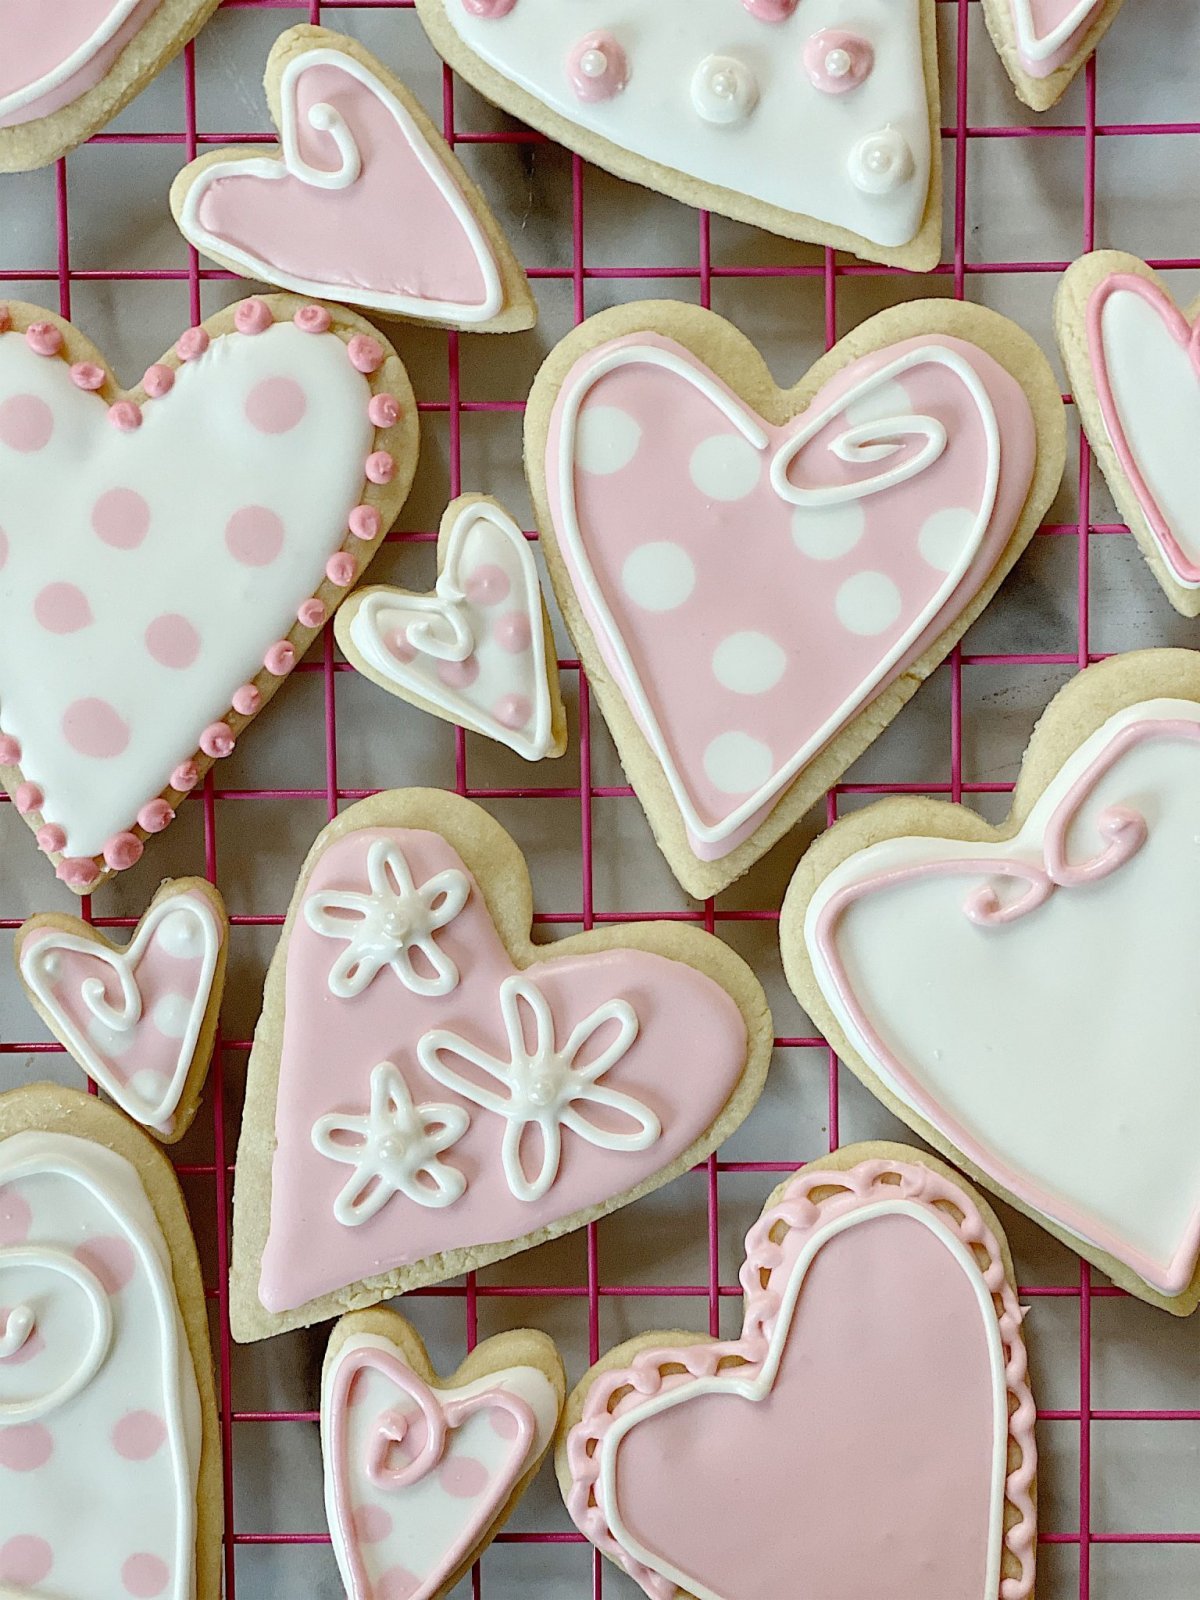 How to Decorate Cookies with Royal Icing 101 - MY 100 YEAR OLD HOME